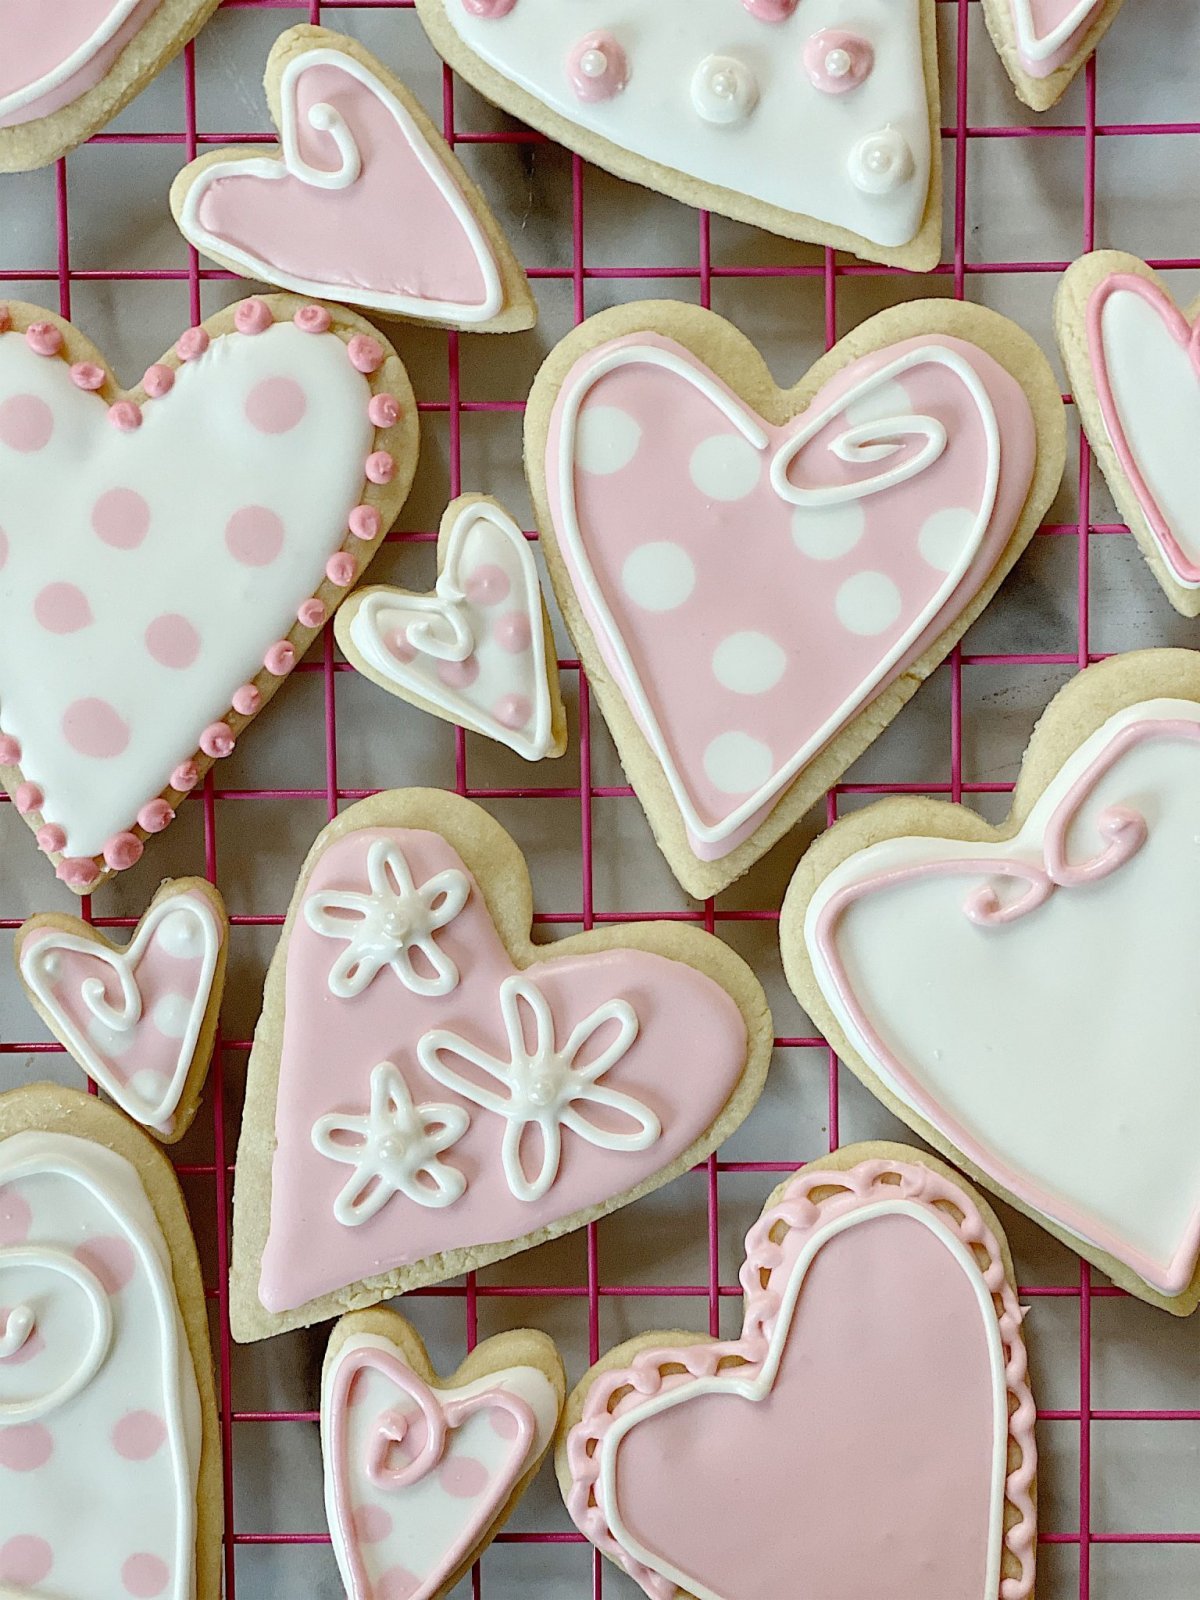 How to Decorate Cookies with Royal Icing 101 - MY 100 YEAR OLD HOME